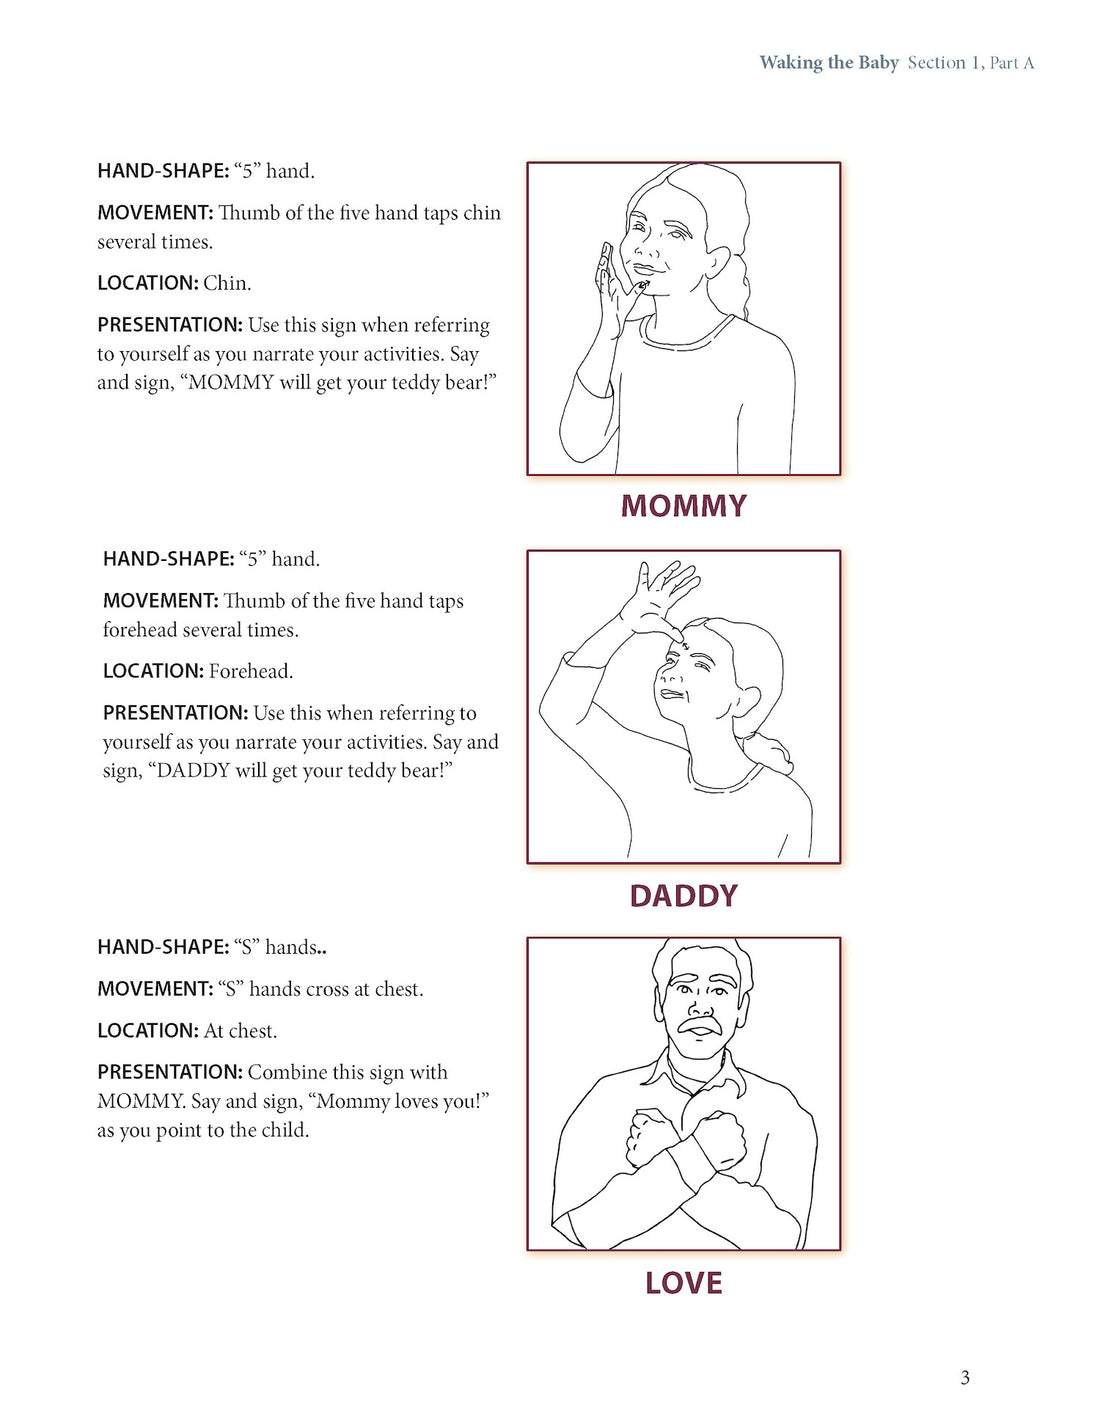 dr. joseph garcia’s complete guide to baby sign language